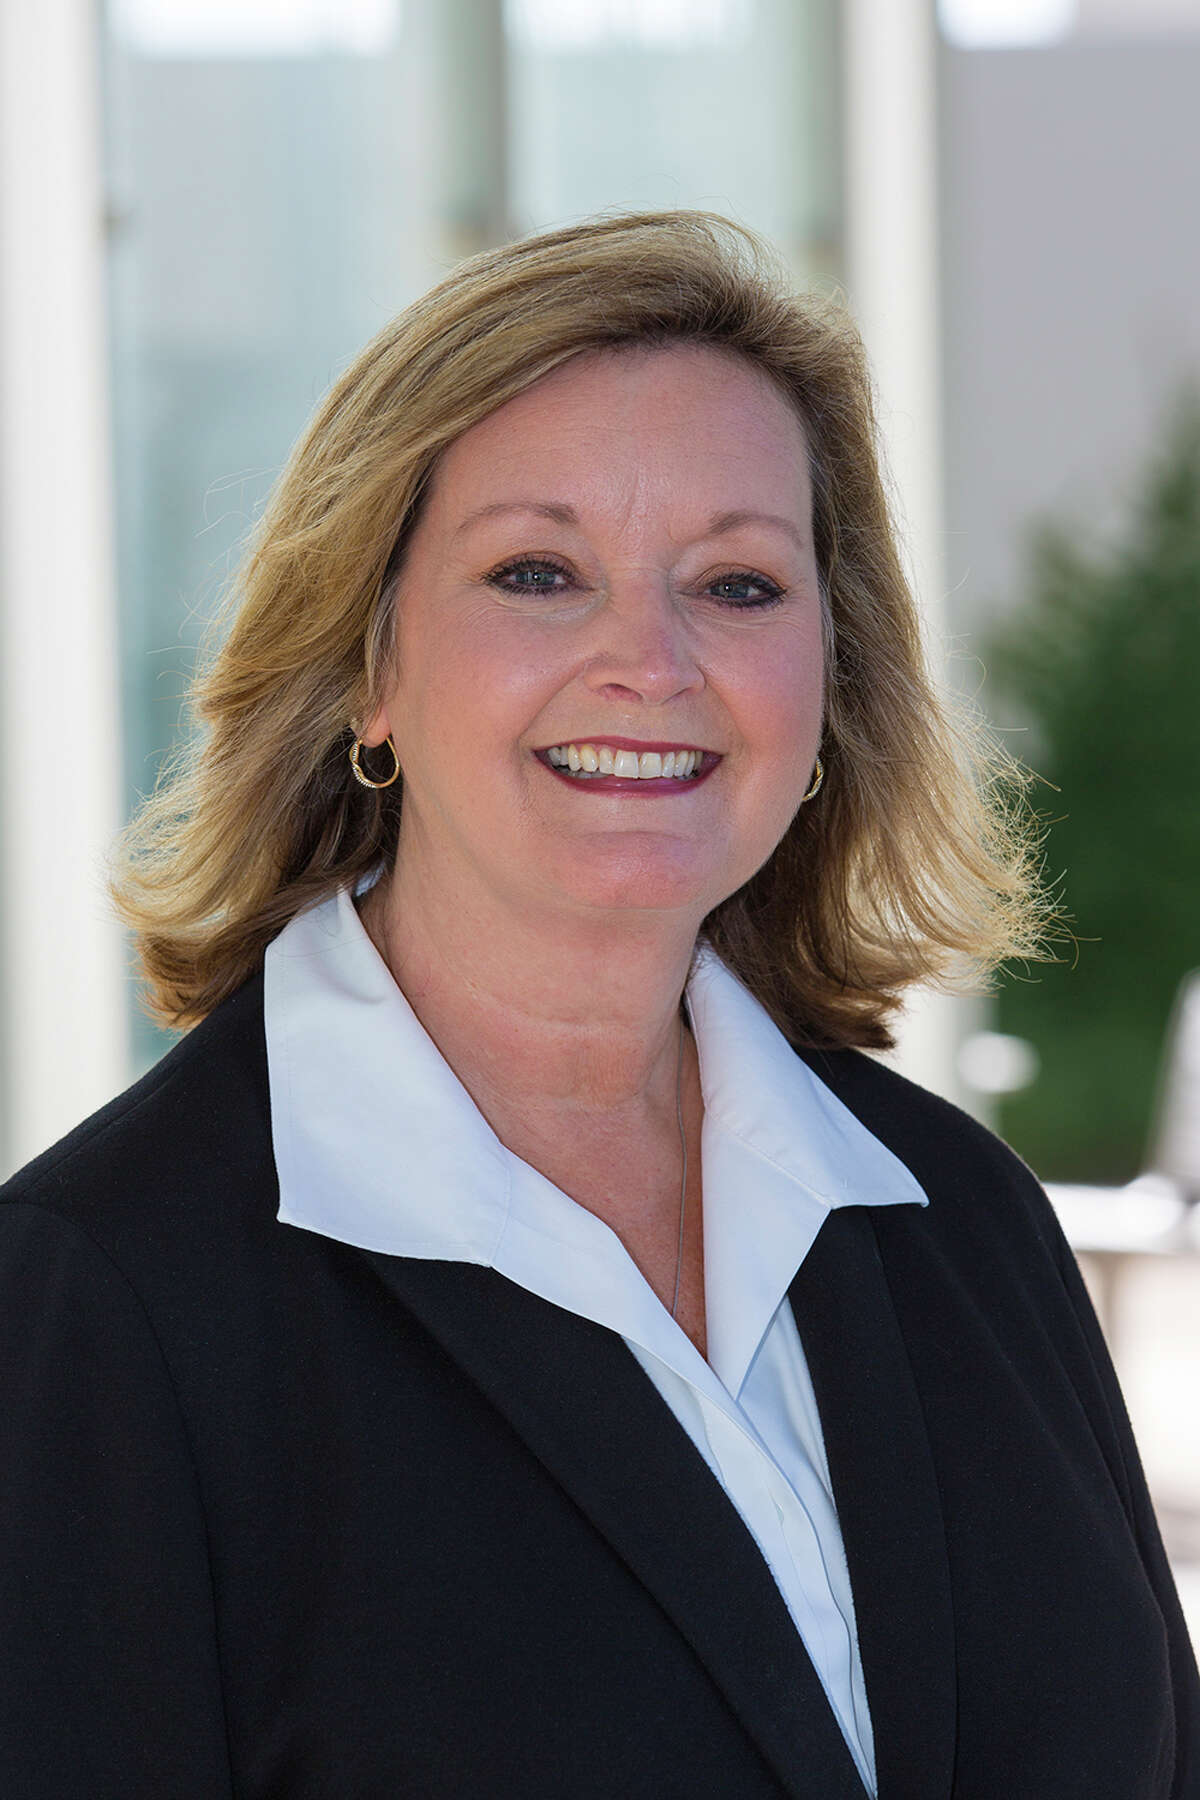 Wood Group Mustang has appointed Elaine Lisenbe to the position of chief financial officer.